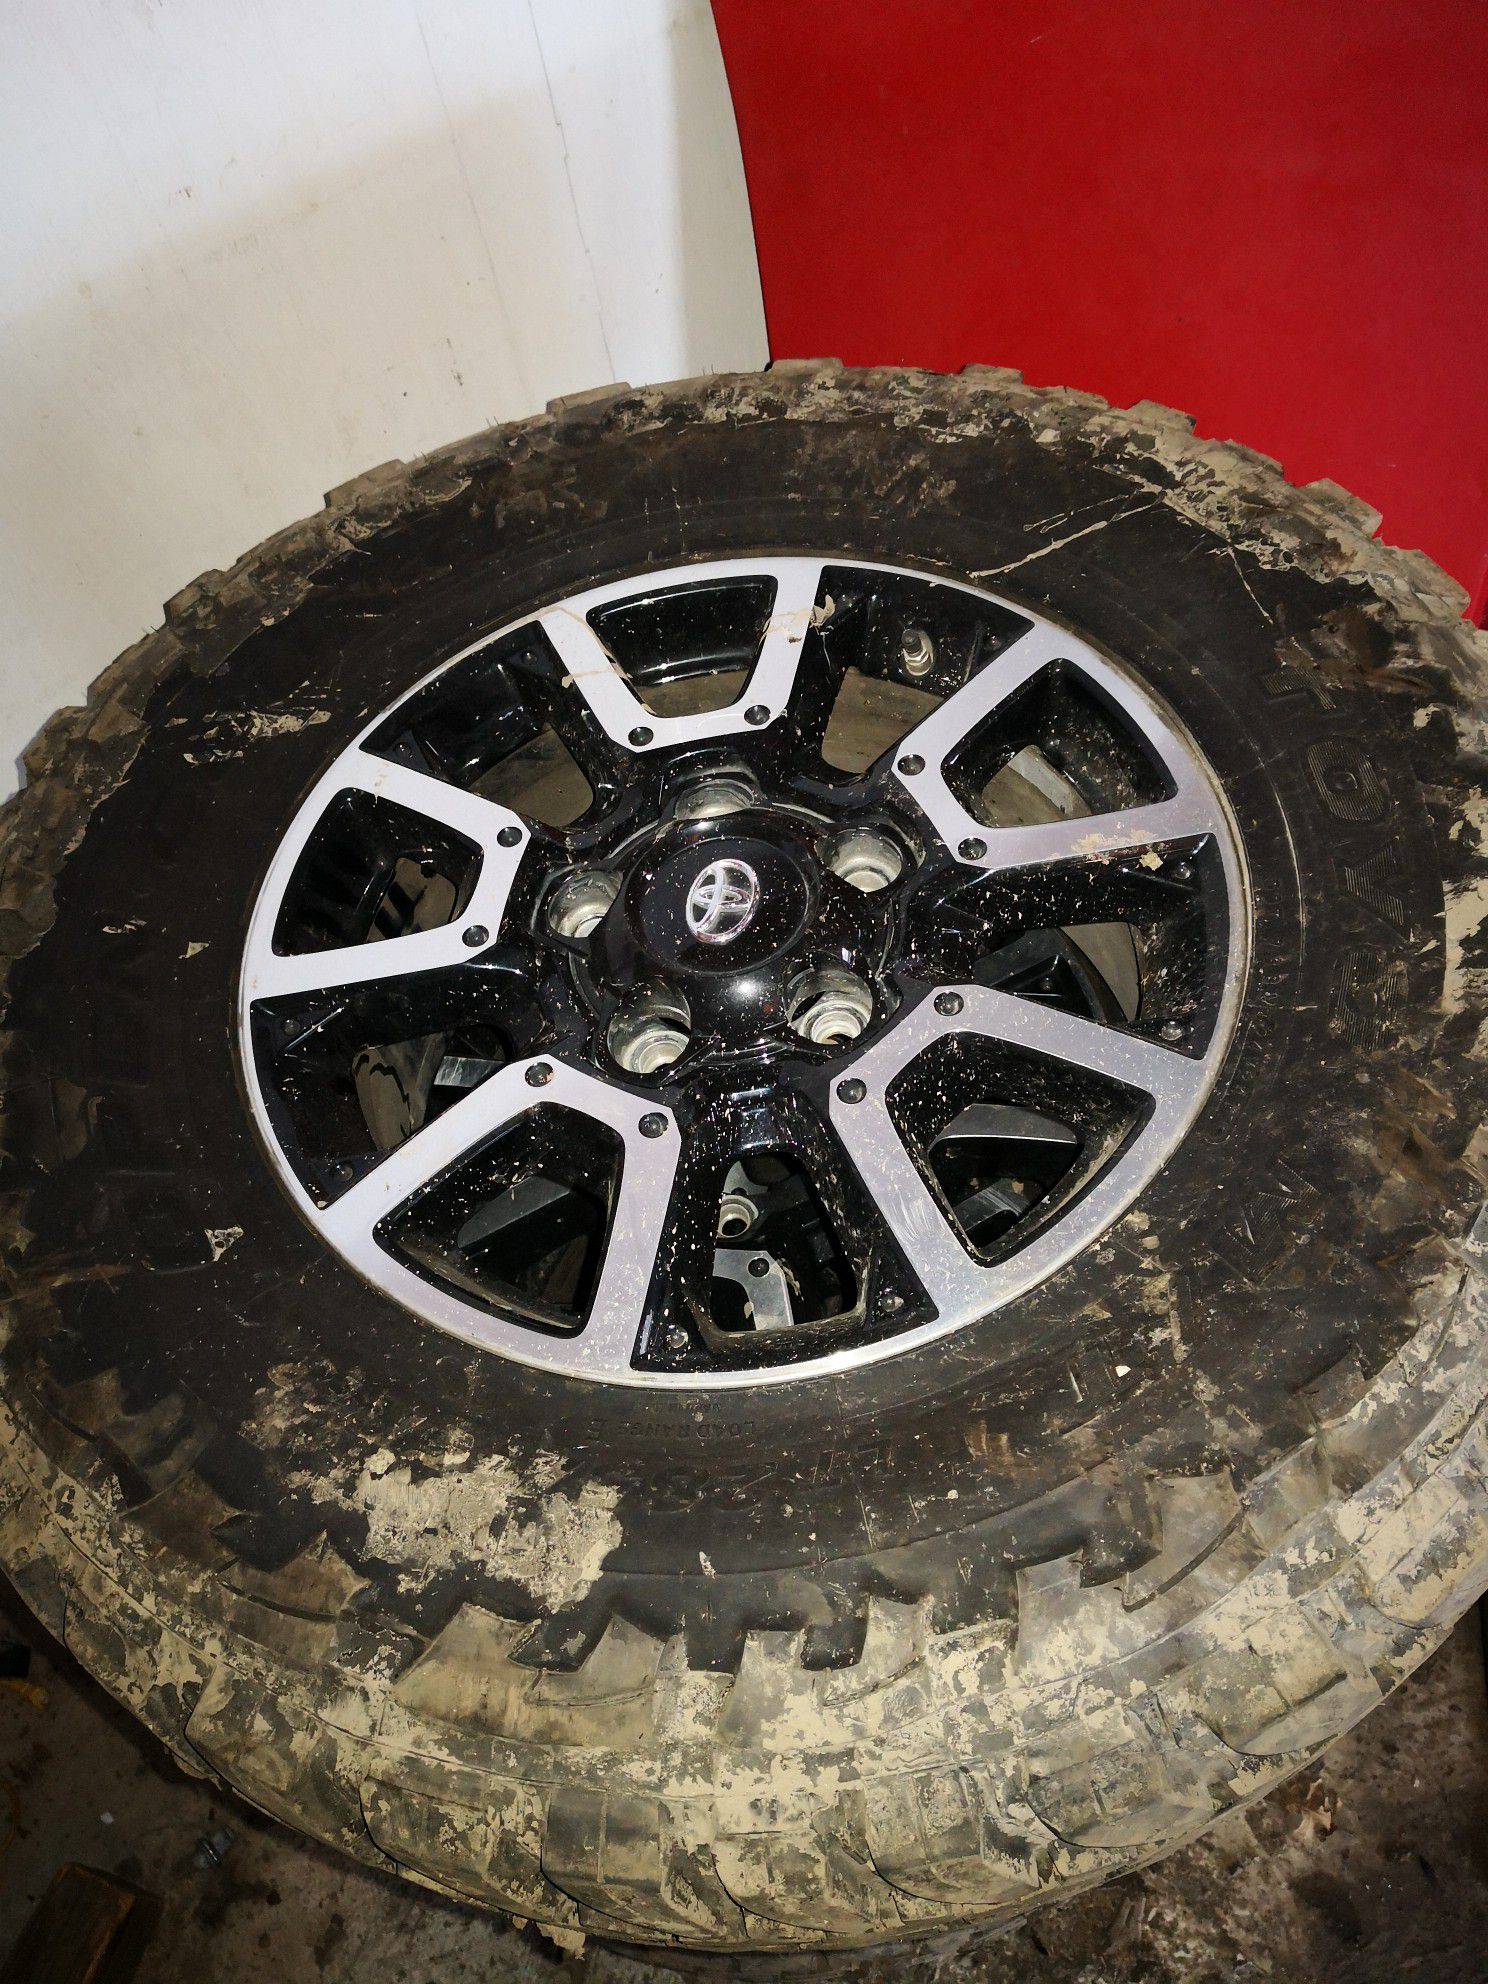 2018 Toyota Tundra rims and tires off-road tires